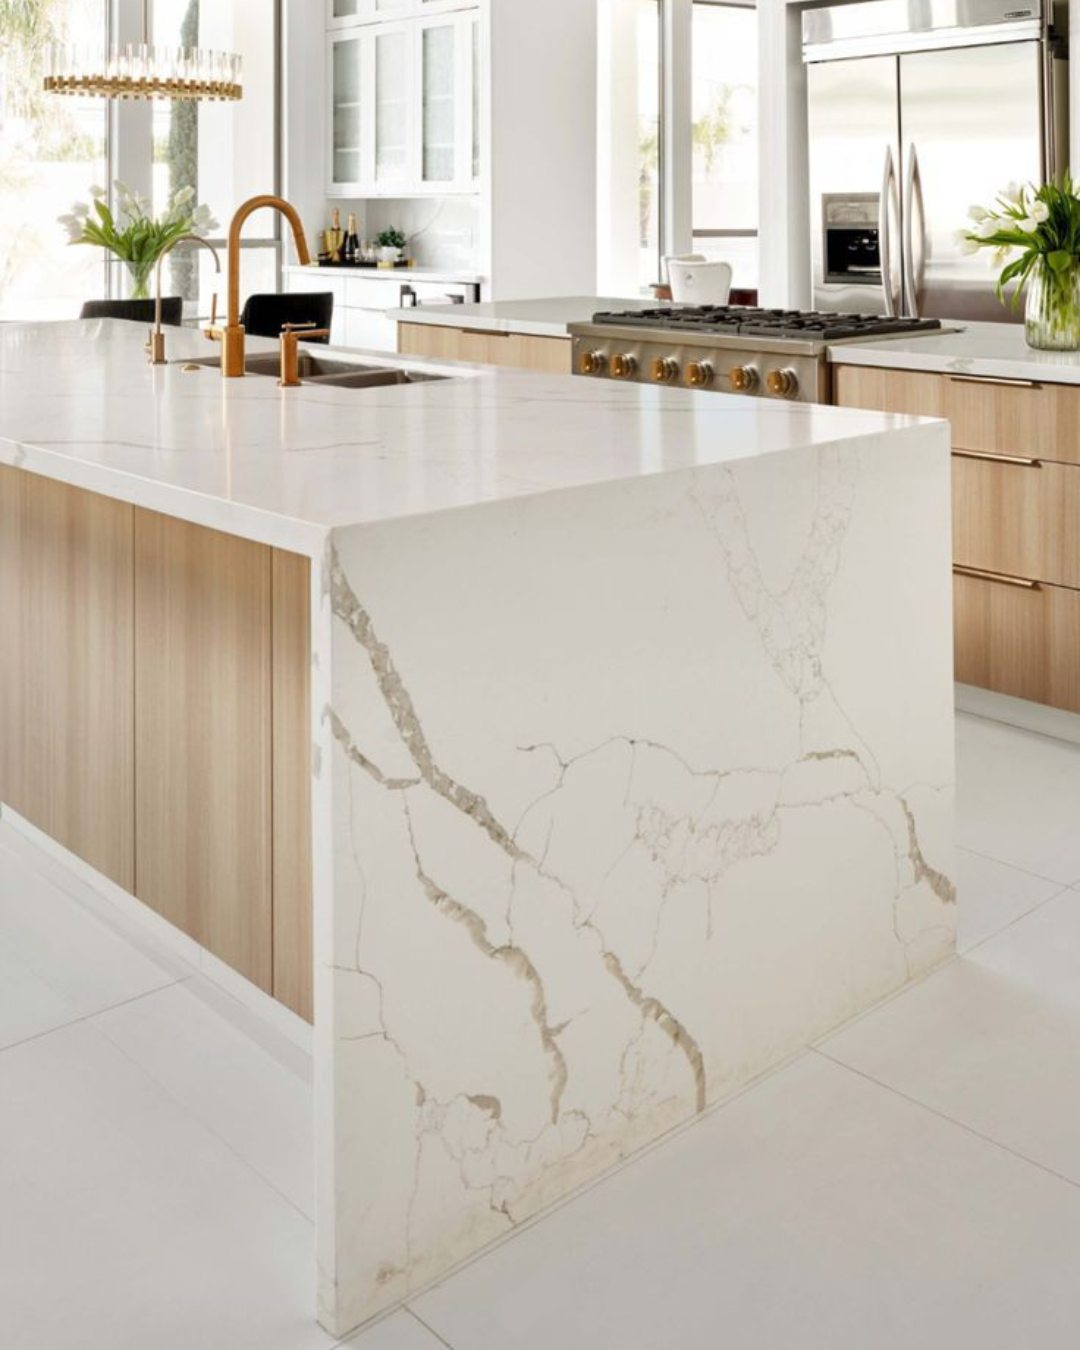 5 Tips To Decorate Your White Kitchens (2022)